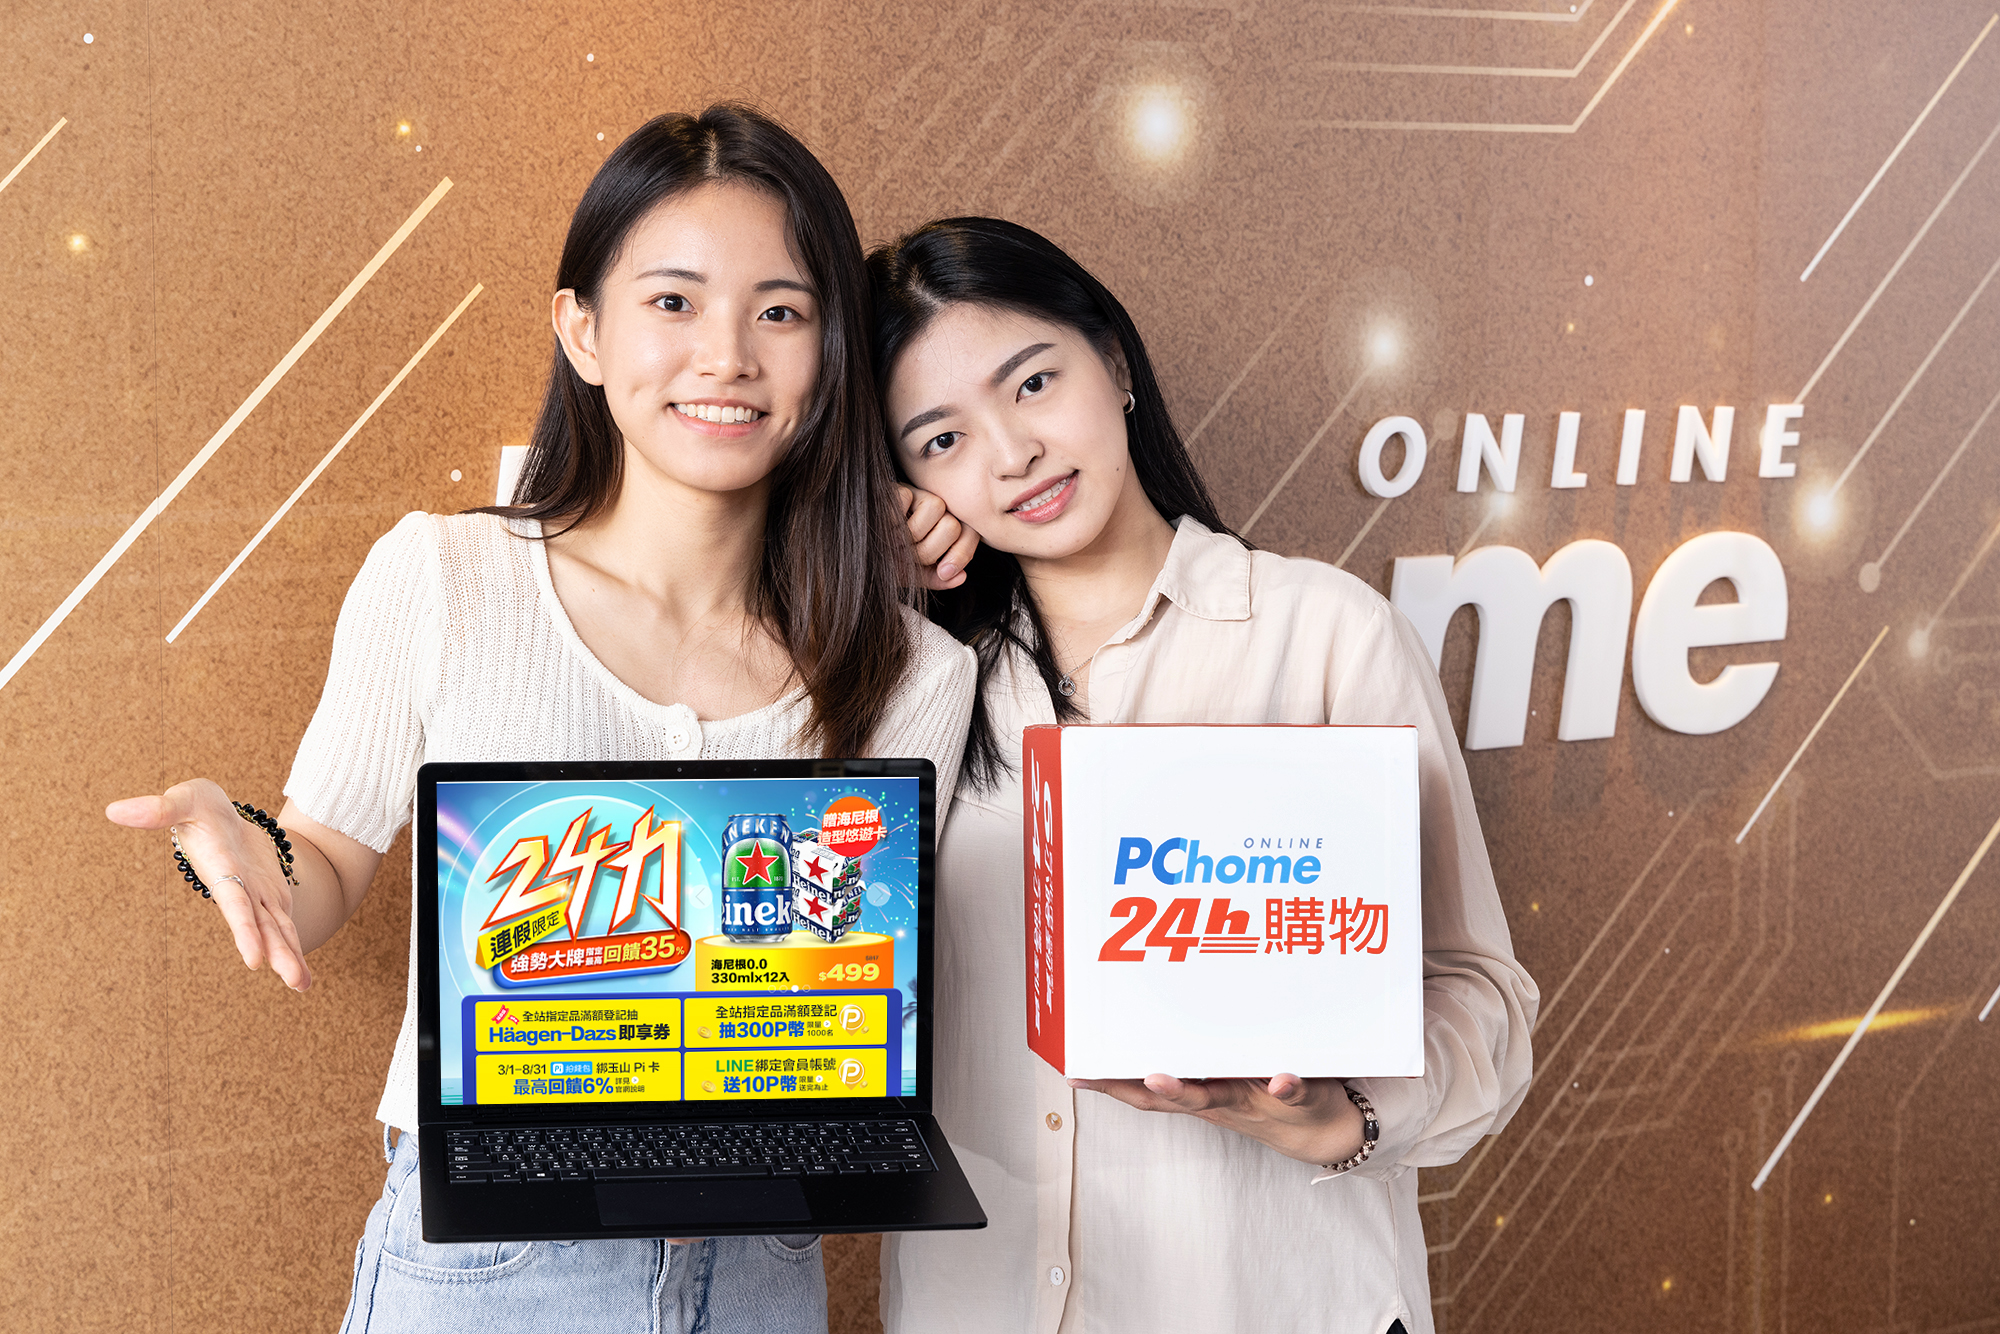 PChome 24h Shopping Offers up to 80% off for 24 Categories